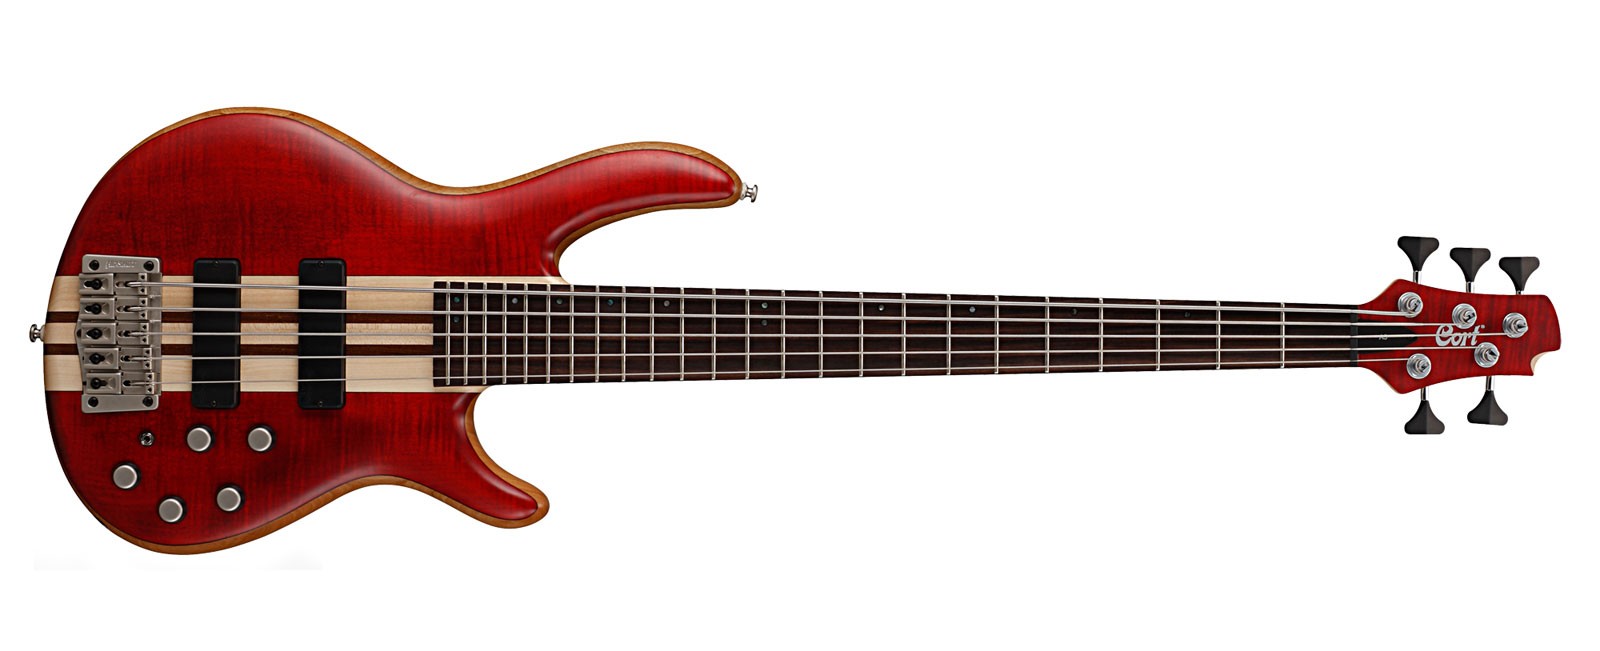 Cort Artisan 5 Plus A5p-fmmh-opbc - Cherry Red - Solid body electric bass - Variation 1